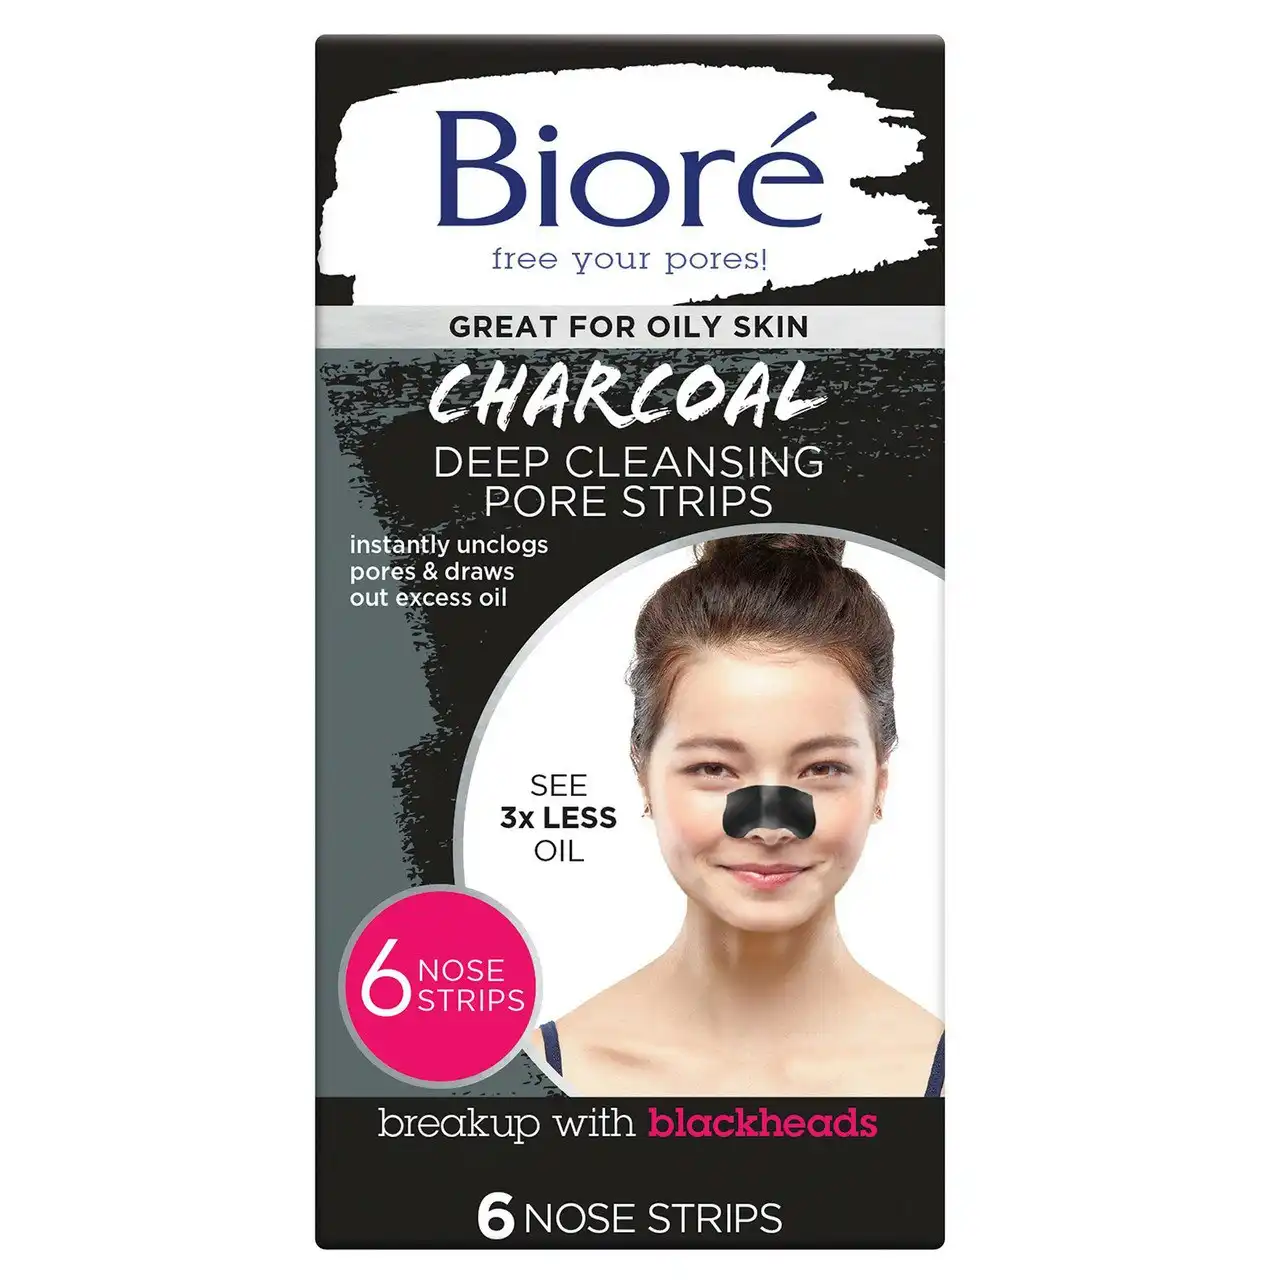 Biore Charcoal Deep Cleansing Pore Strips 6 Pack